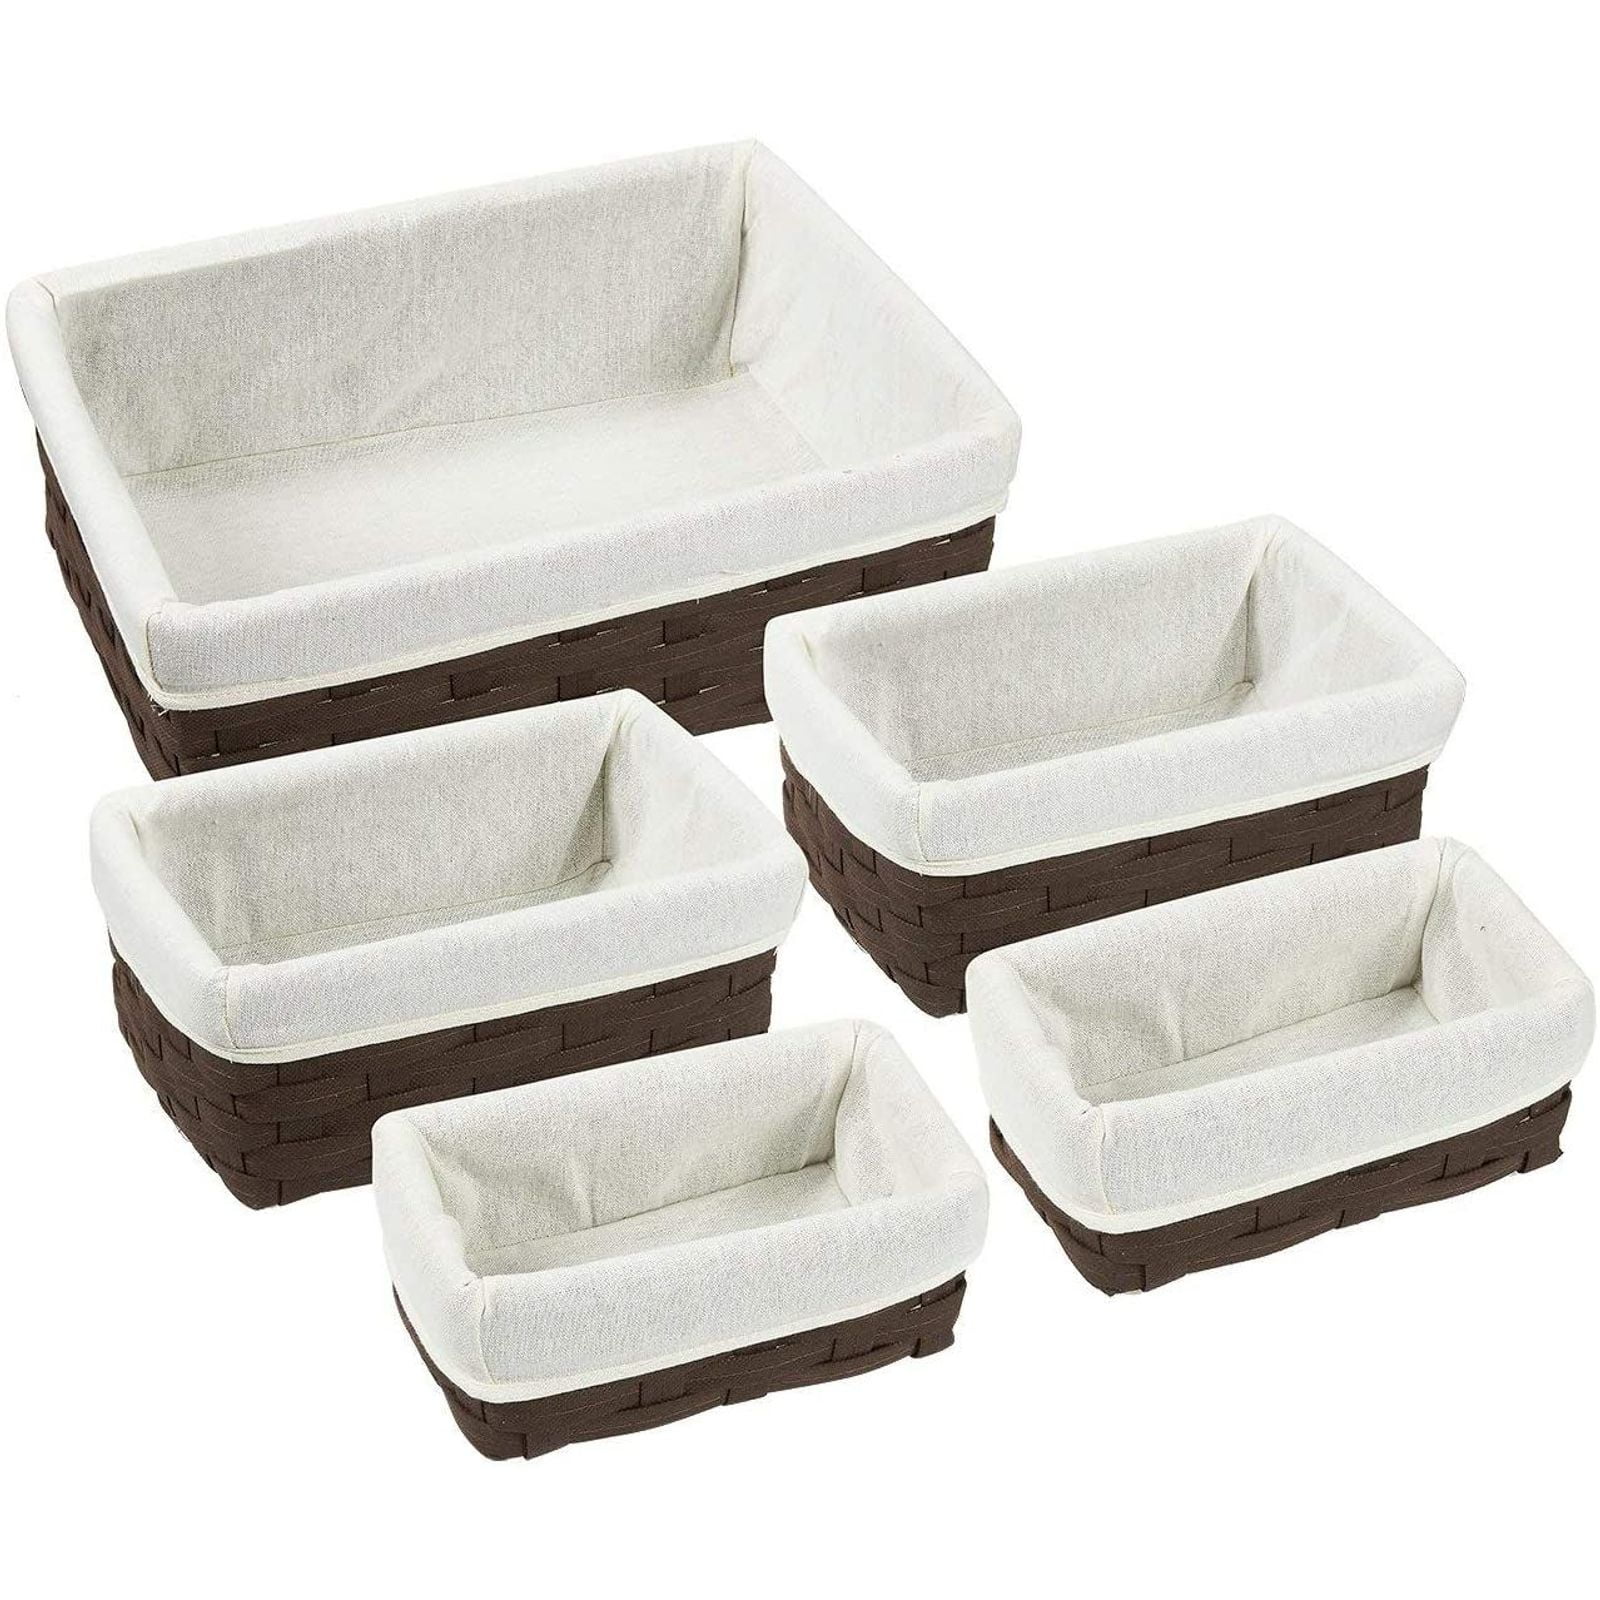 Brown Storage Organizers For Shelves, Baskets For Shelves